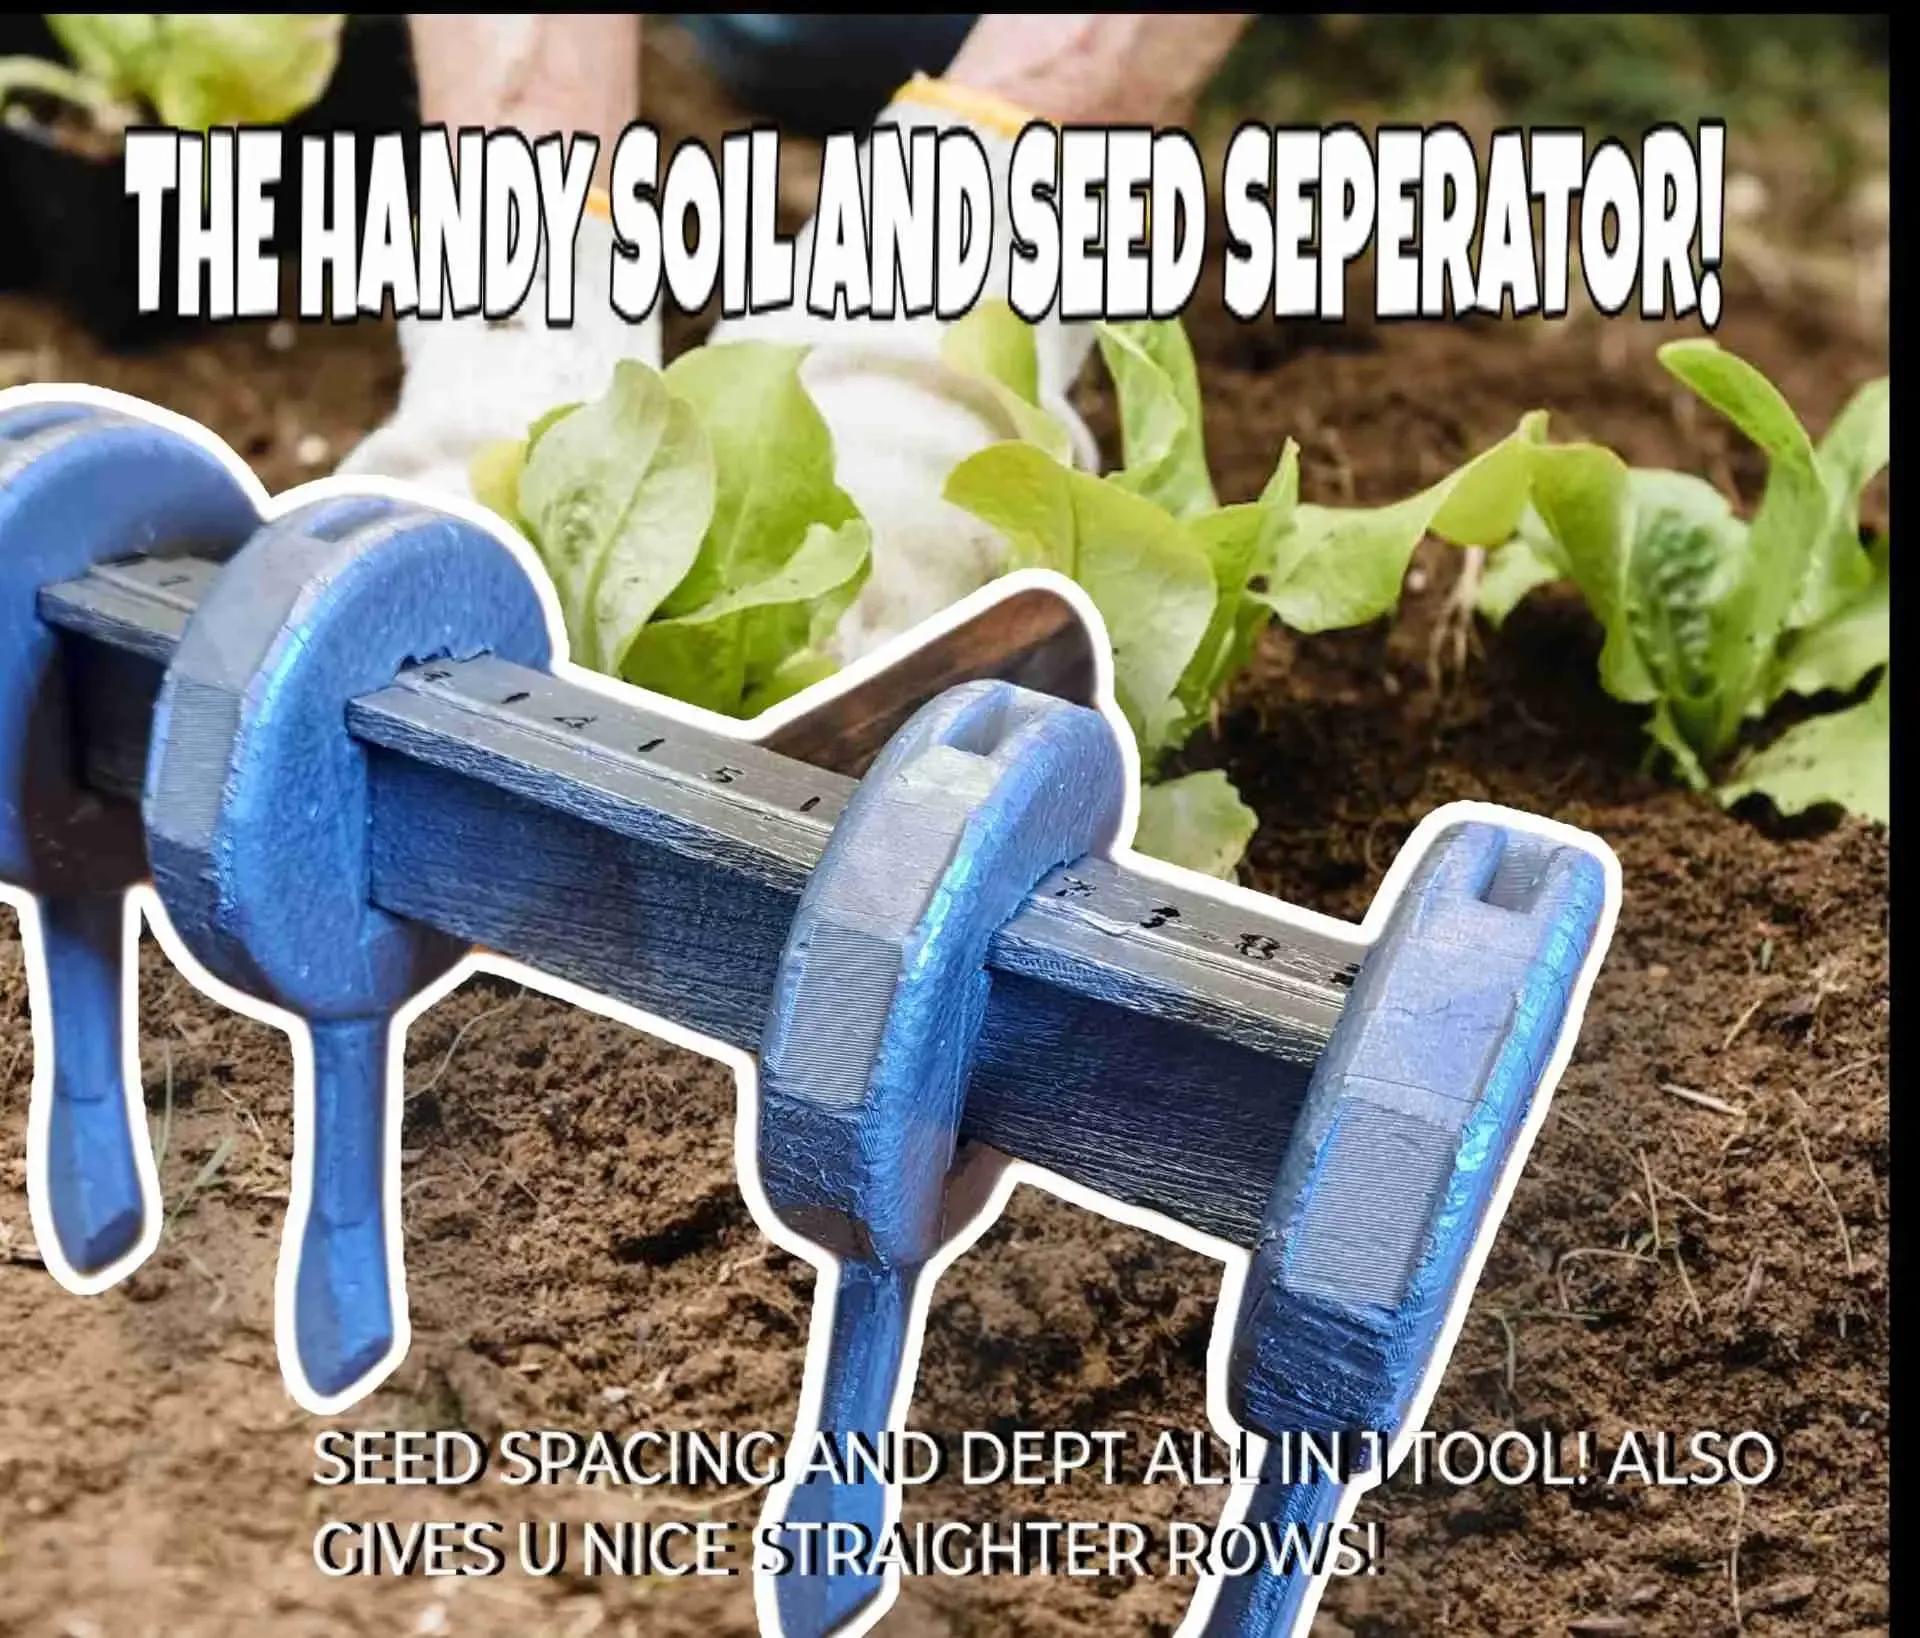 Soil and Seed Seperator